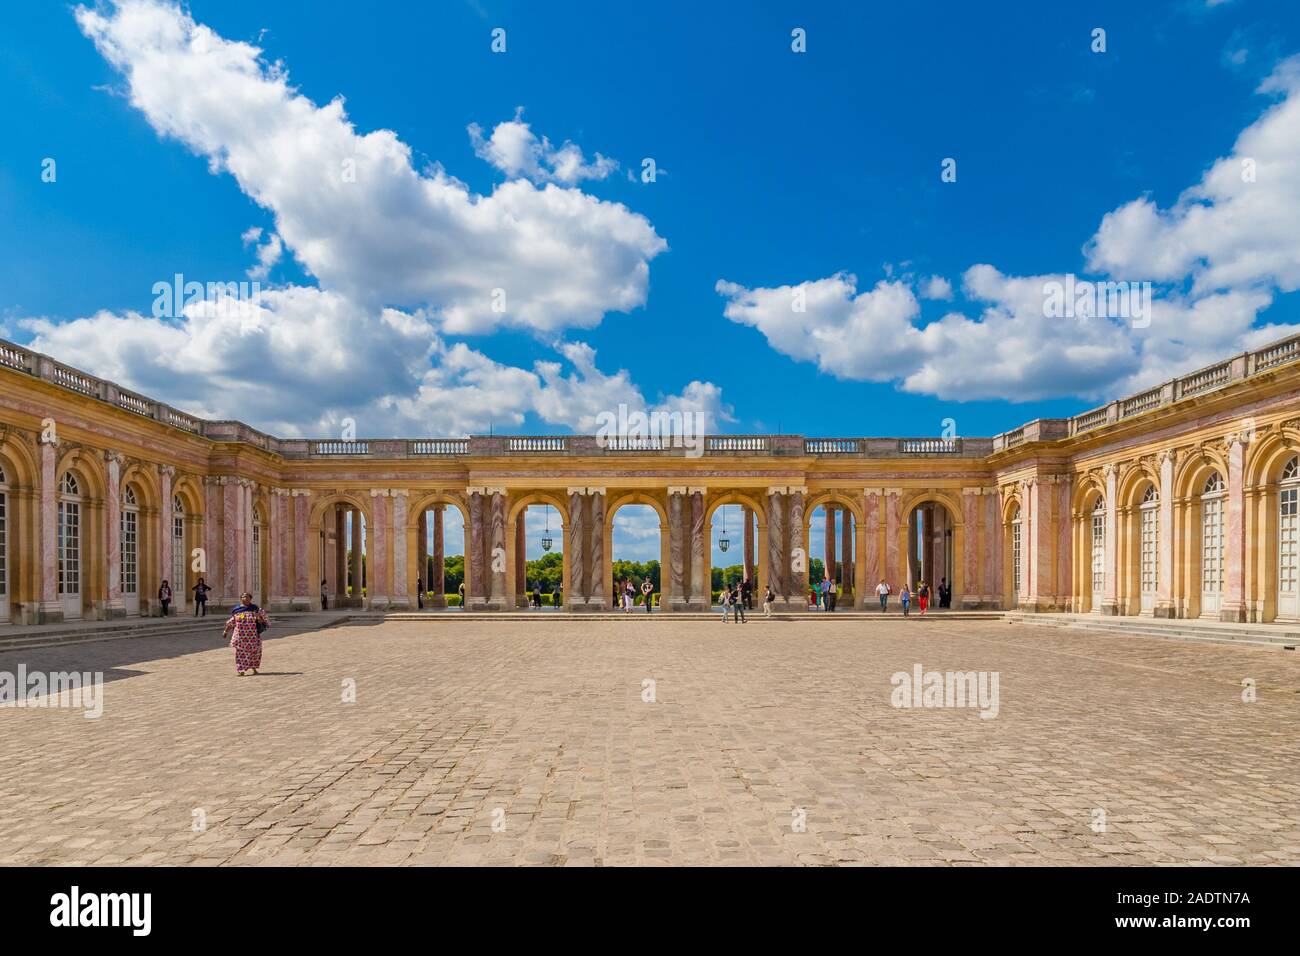 Lovely panoramic view of the cobbled stone courtyard and the sheltered colonnade connecting the two wings of the famous Grand Trianon Palace in... Stock Photo